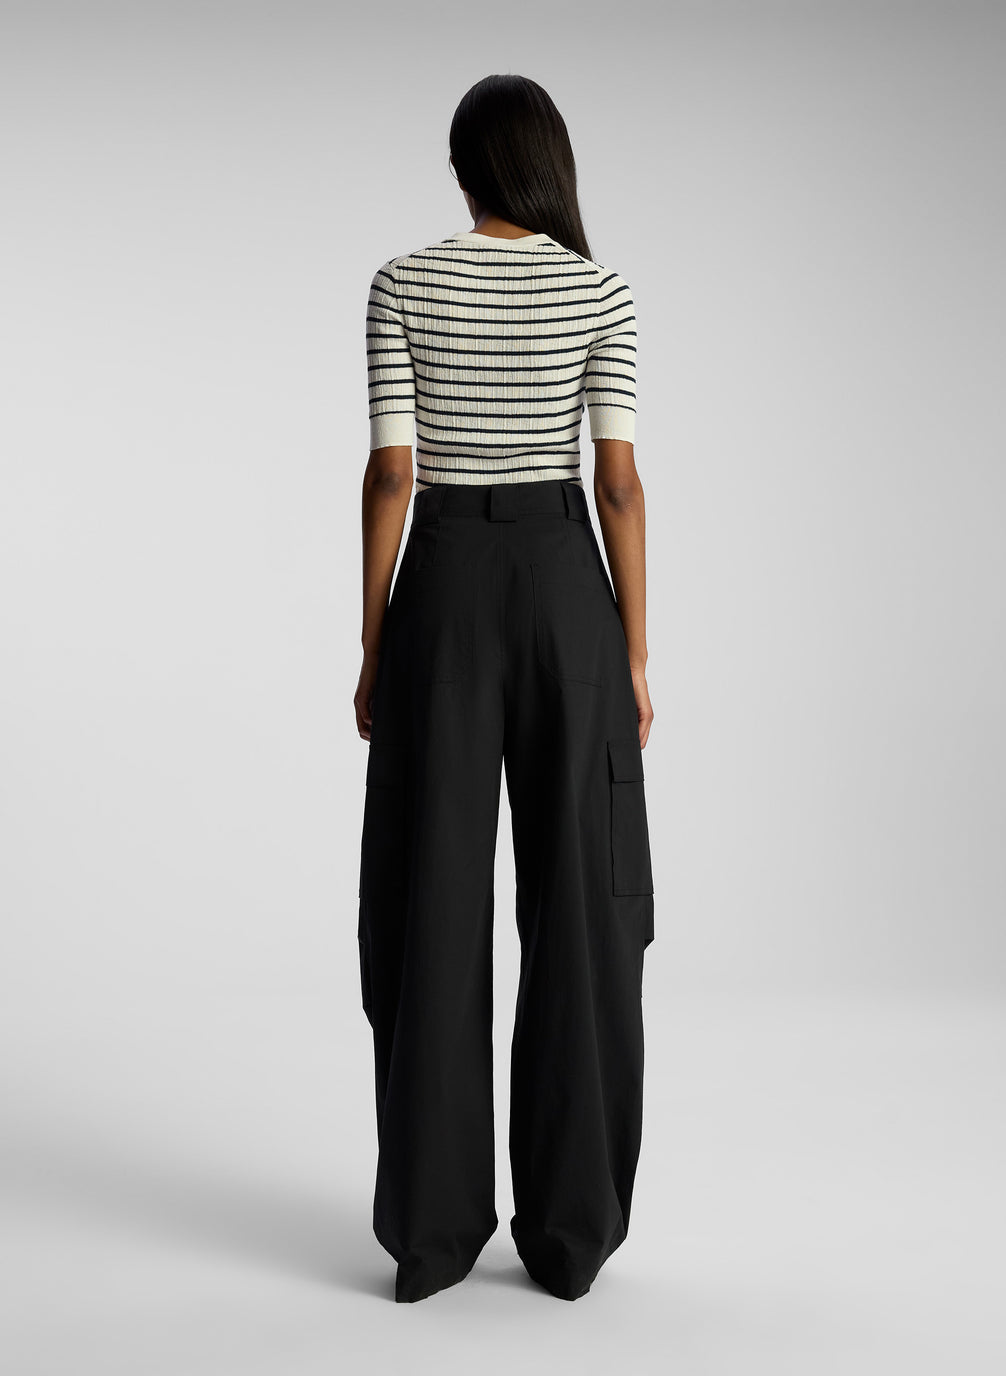 back view of woman wearing striped top and black cargo pants